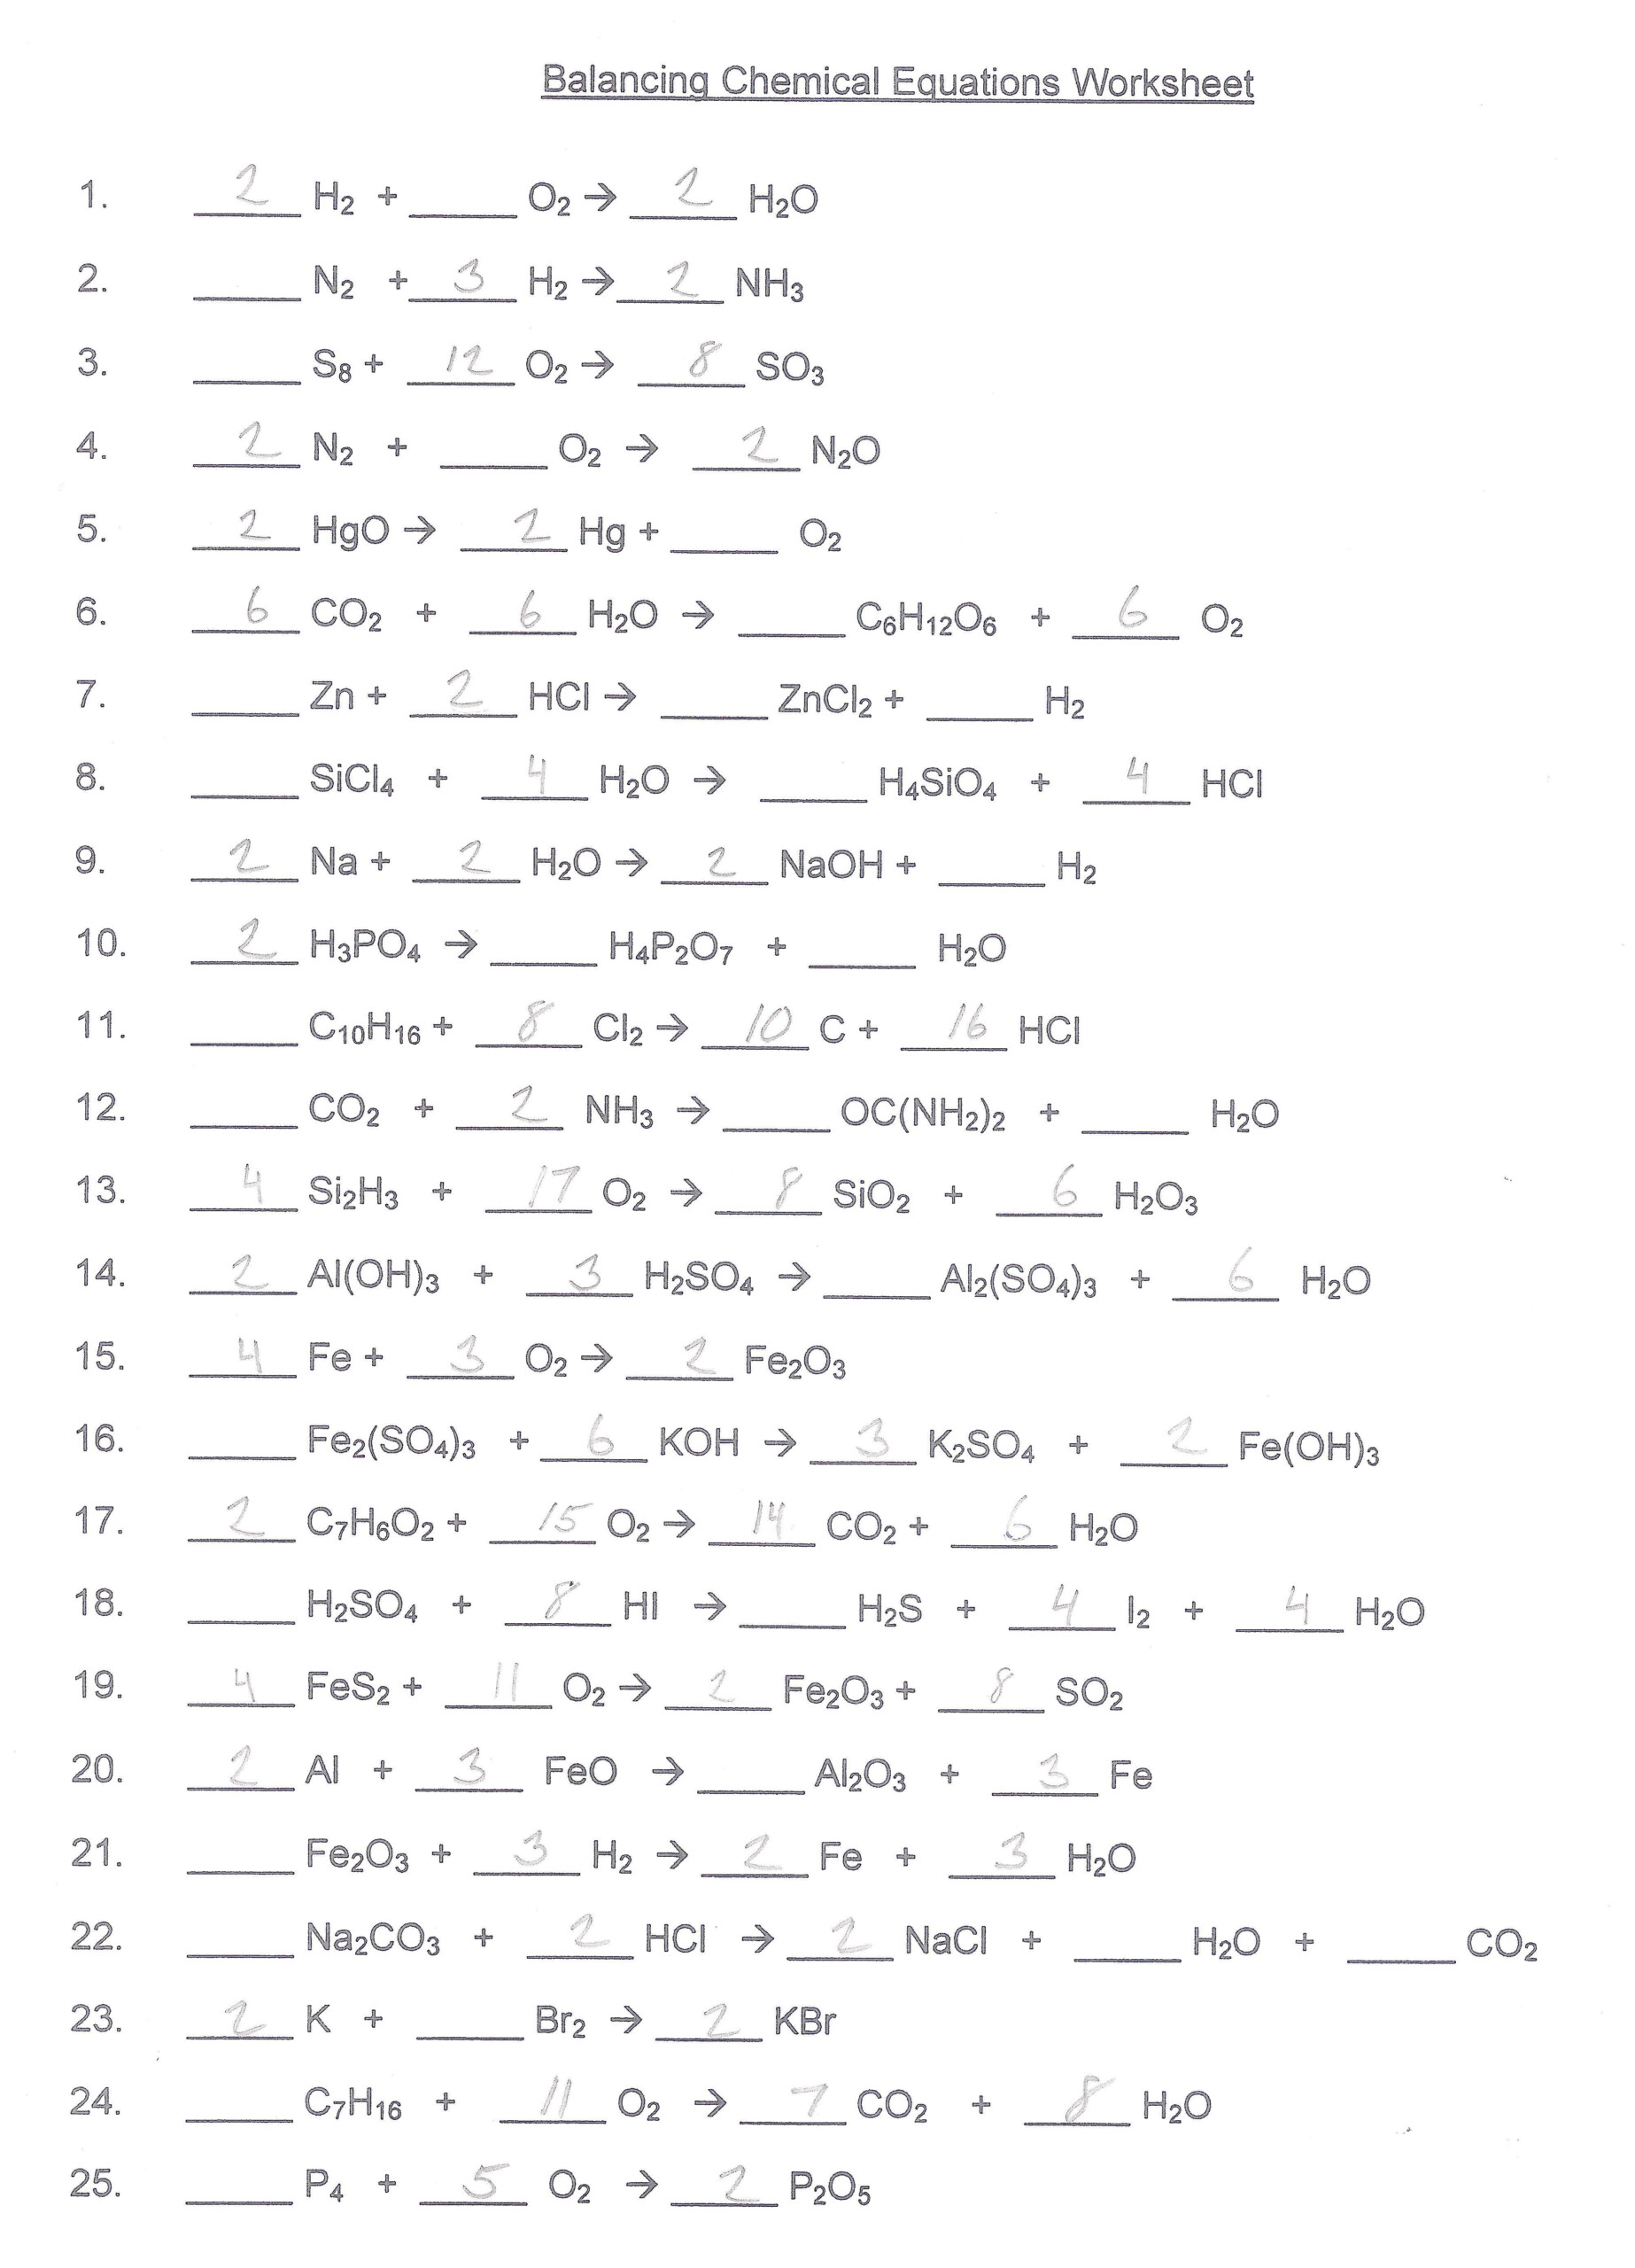 July 2019 Archive Unit 7 Balancing Chemical Reactions Db excel